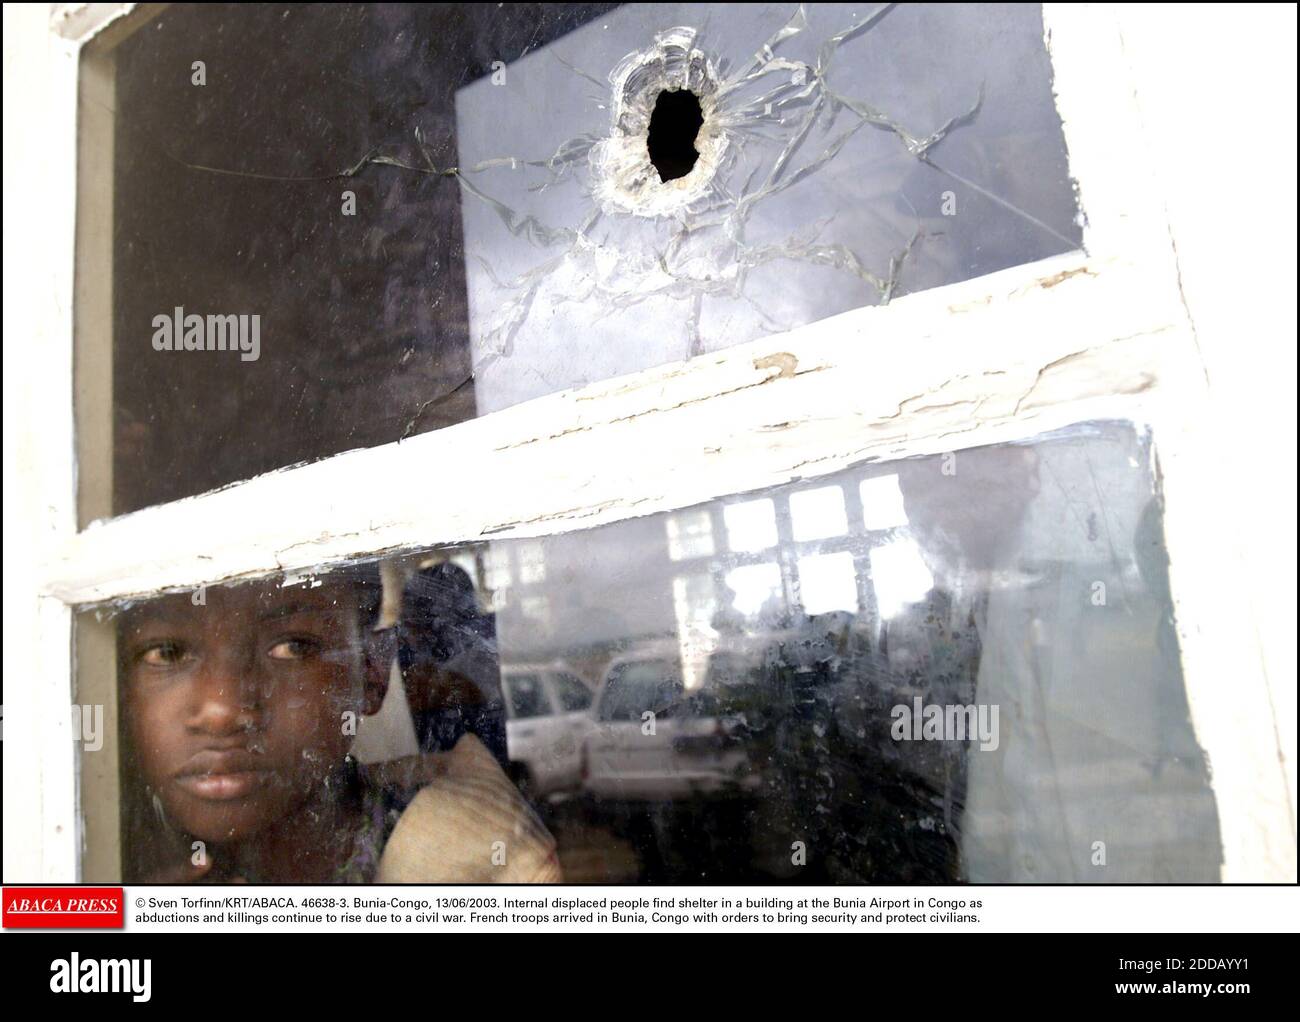 NO FILM, NO VIDEO, NO TV, NO DOCUMENTARY - © Sven Torfinn/KRT/ABACA. 46638-3. Bunia-Congo, 13/06/2003. Internal displaced people find shelter in a building at the Bunia Airport in Congo as abductions and killings continue to rise due to a civil war. French troops arrived in Bunia, Congo with order Stock Photo